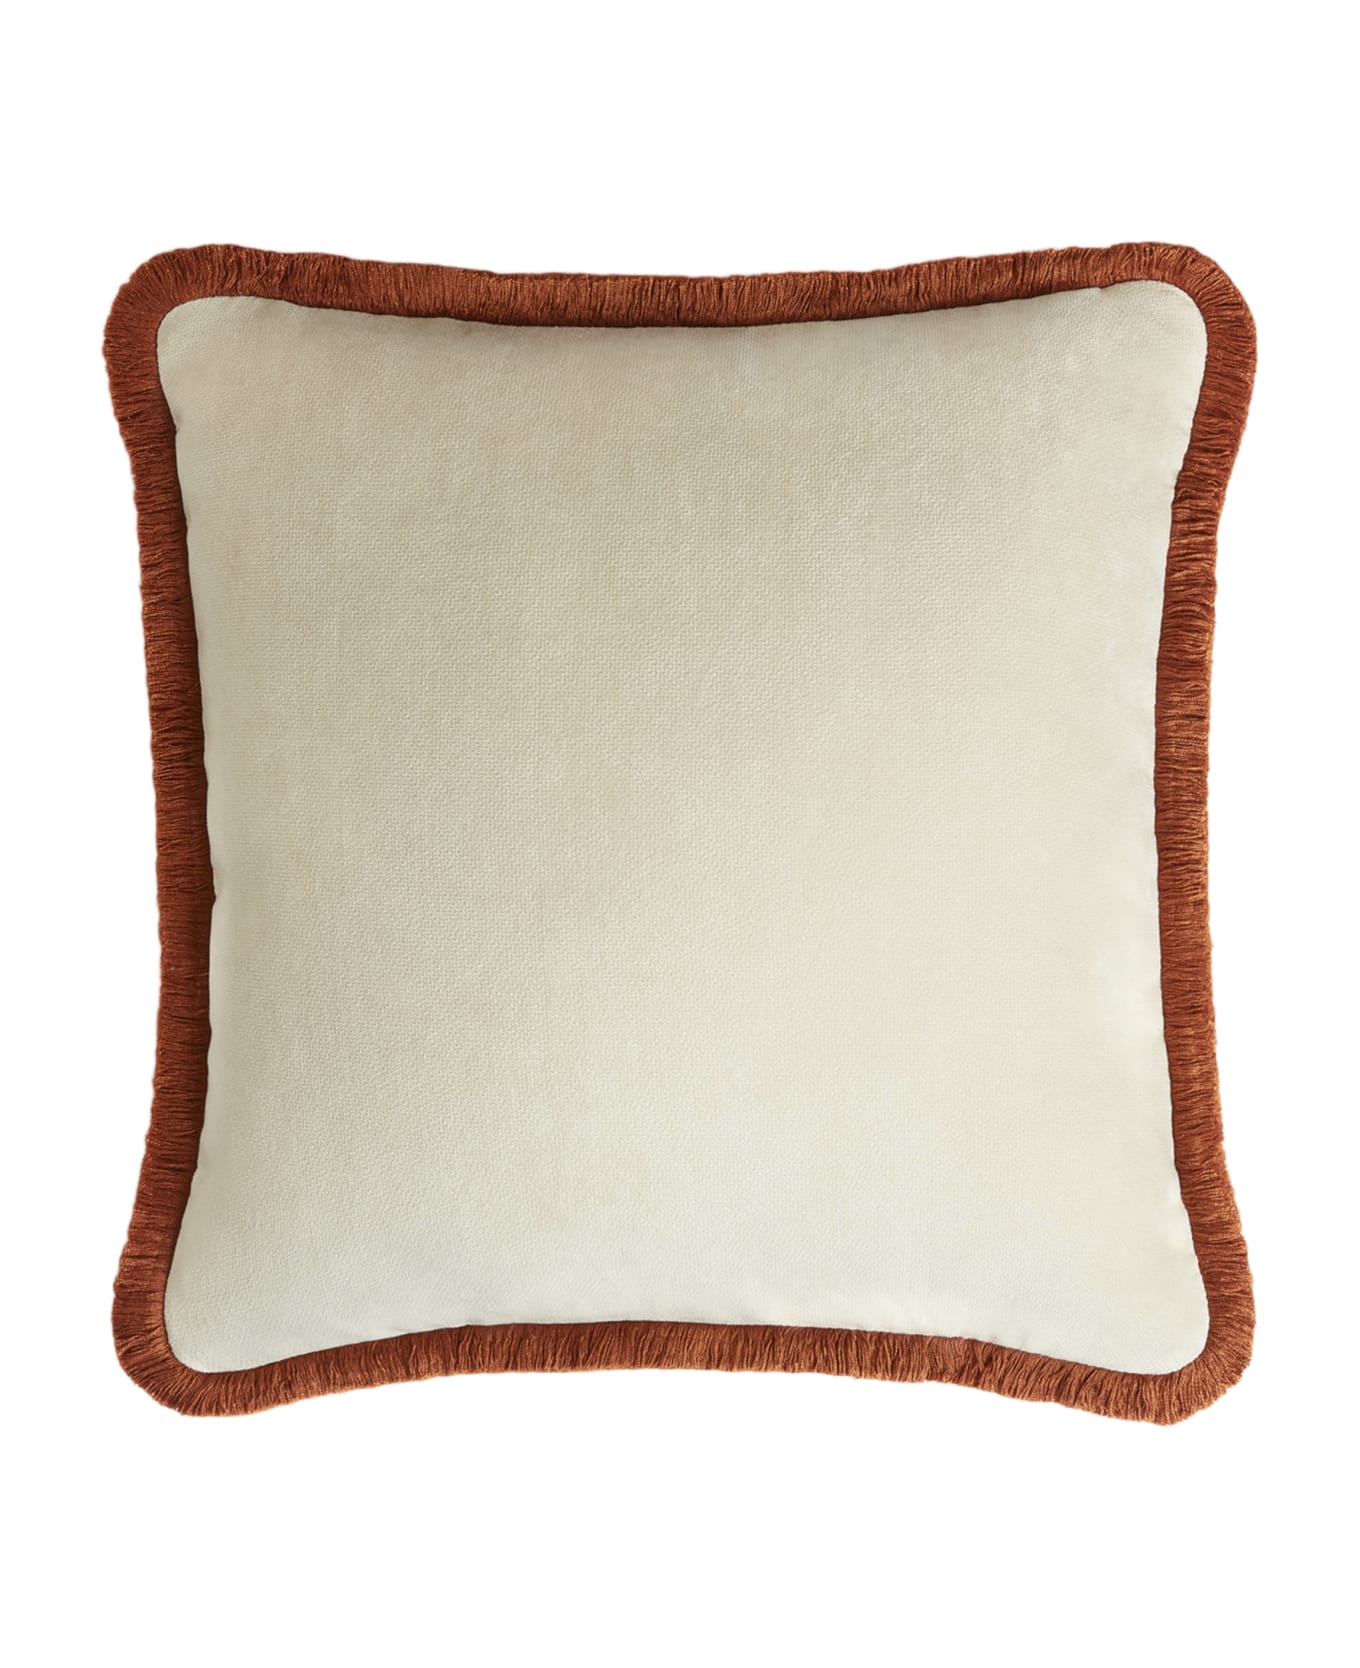 Lo Decor Happy Pillow   Dirty White Velvet With Brick Red Fringes - Dirty White / Brick red クッション